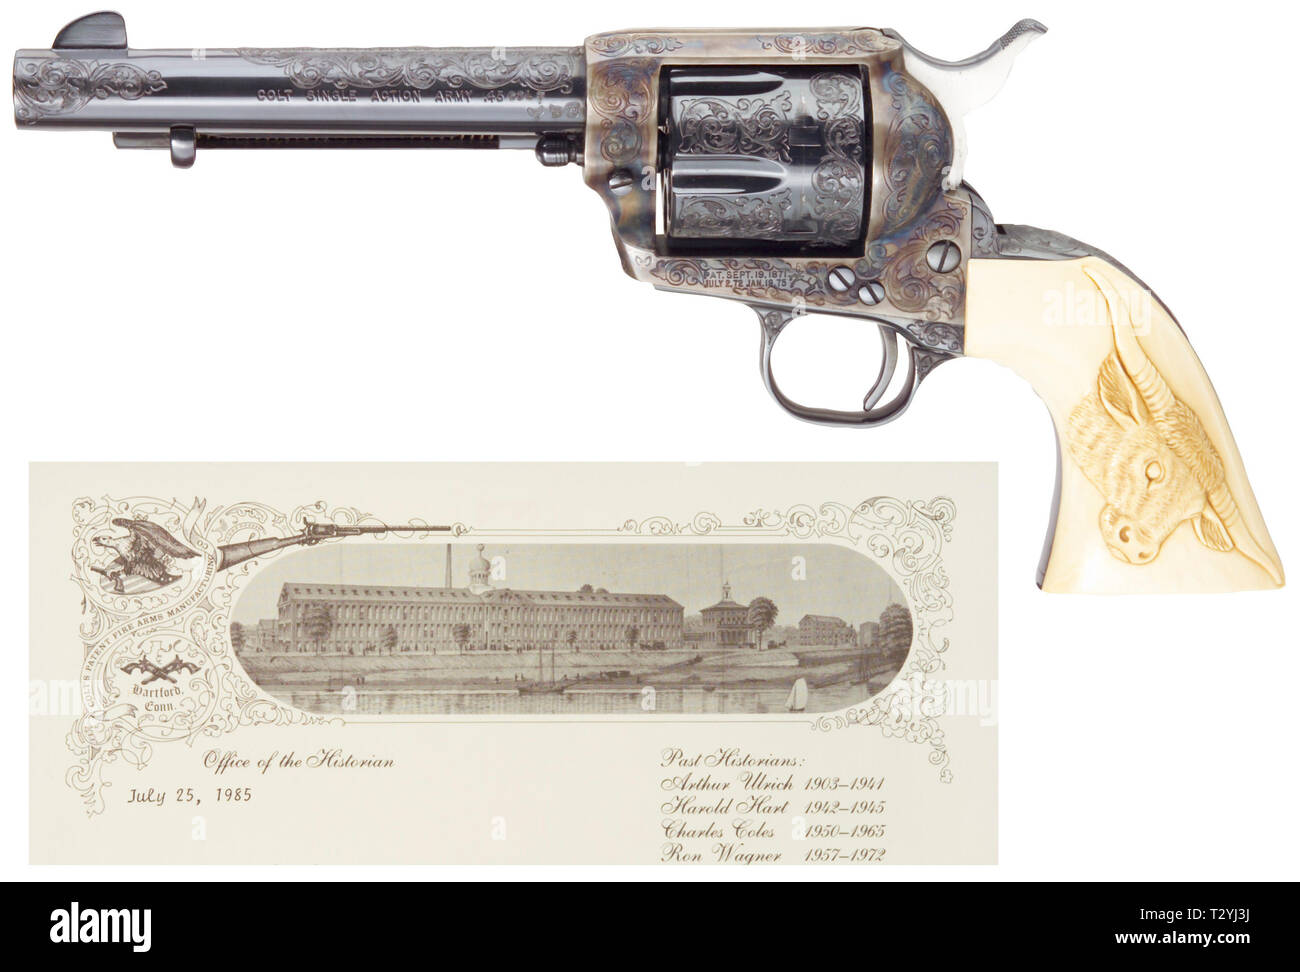 Small arms, revolver, Colt Single Action Army Model 1873 Peacemaker, caliber .45, Editorial-Use-Only Stock Photo